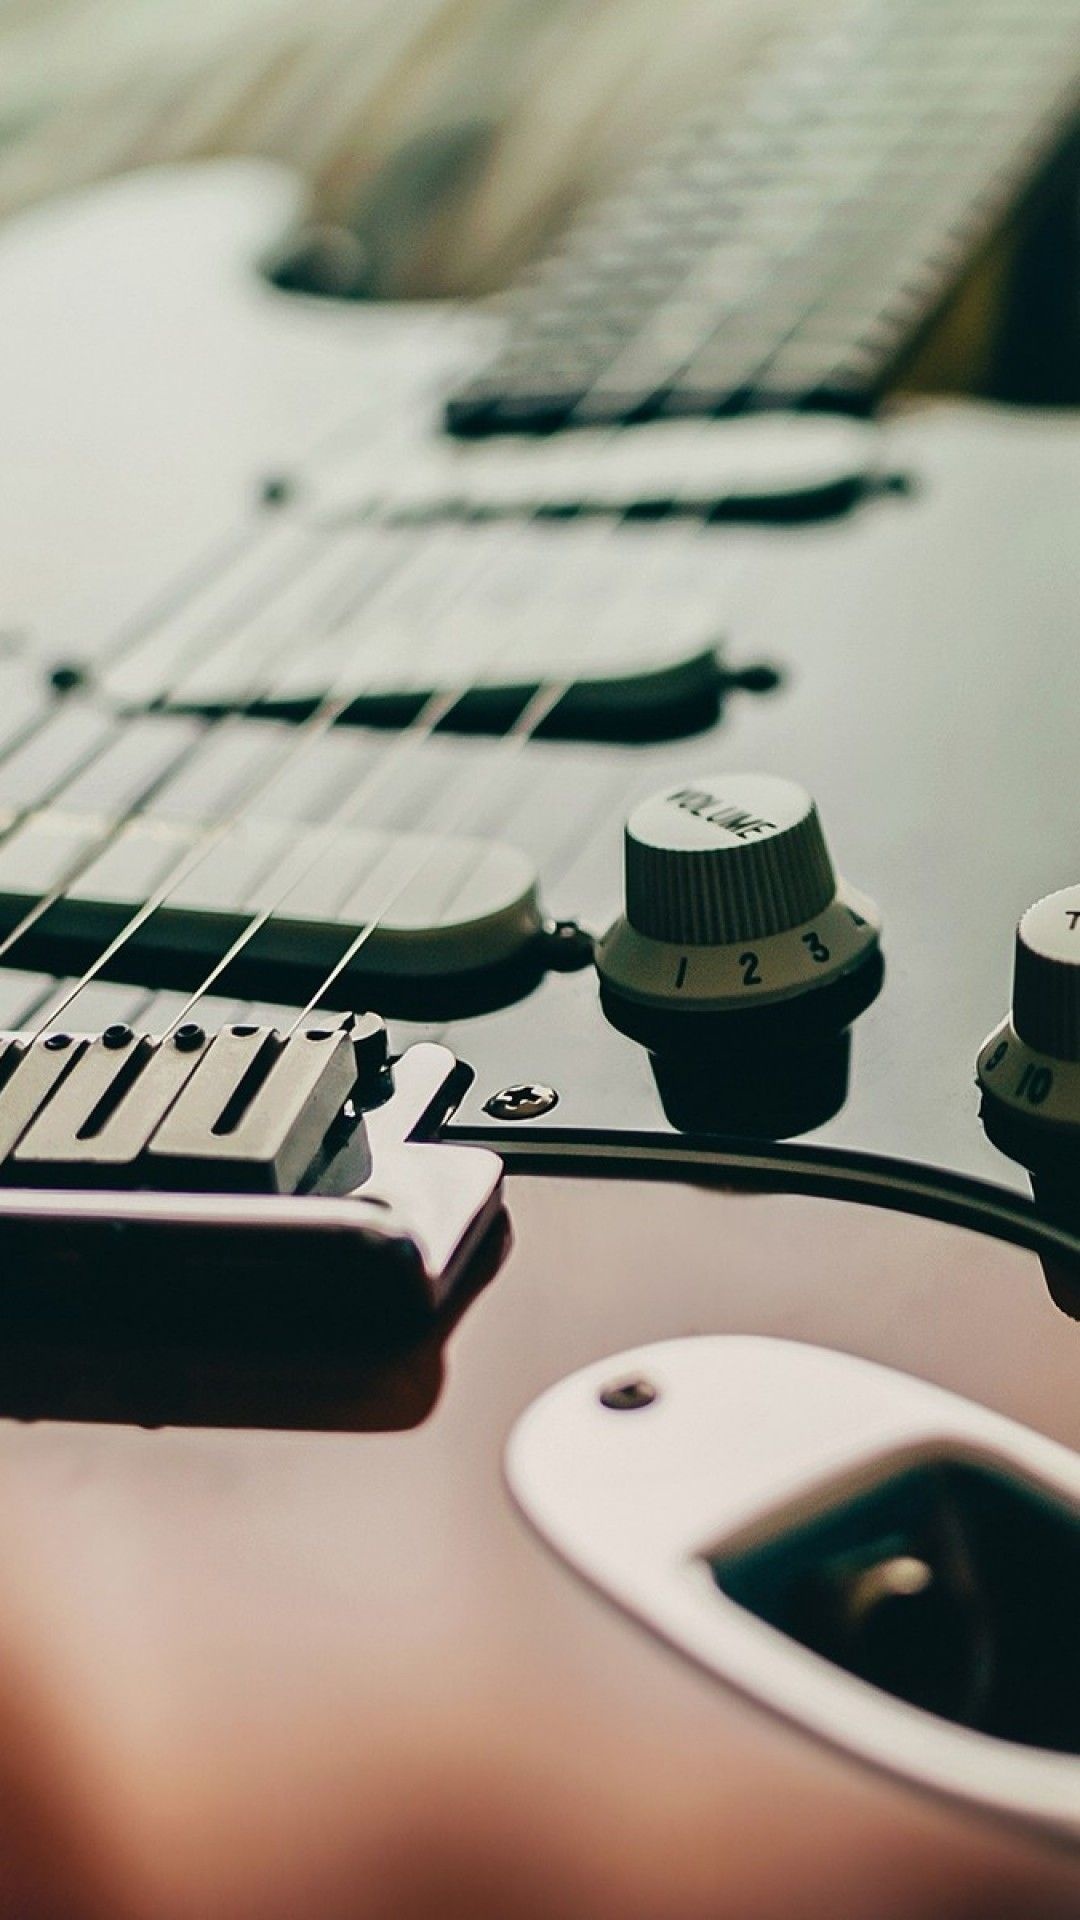 Guitar: Fender, An instrument that requires external amplification in order to be heard. 1080x1920 Full HD Background.